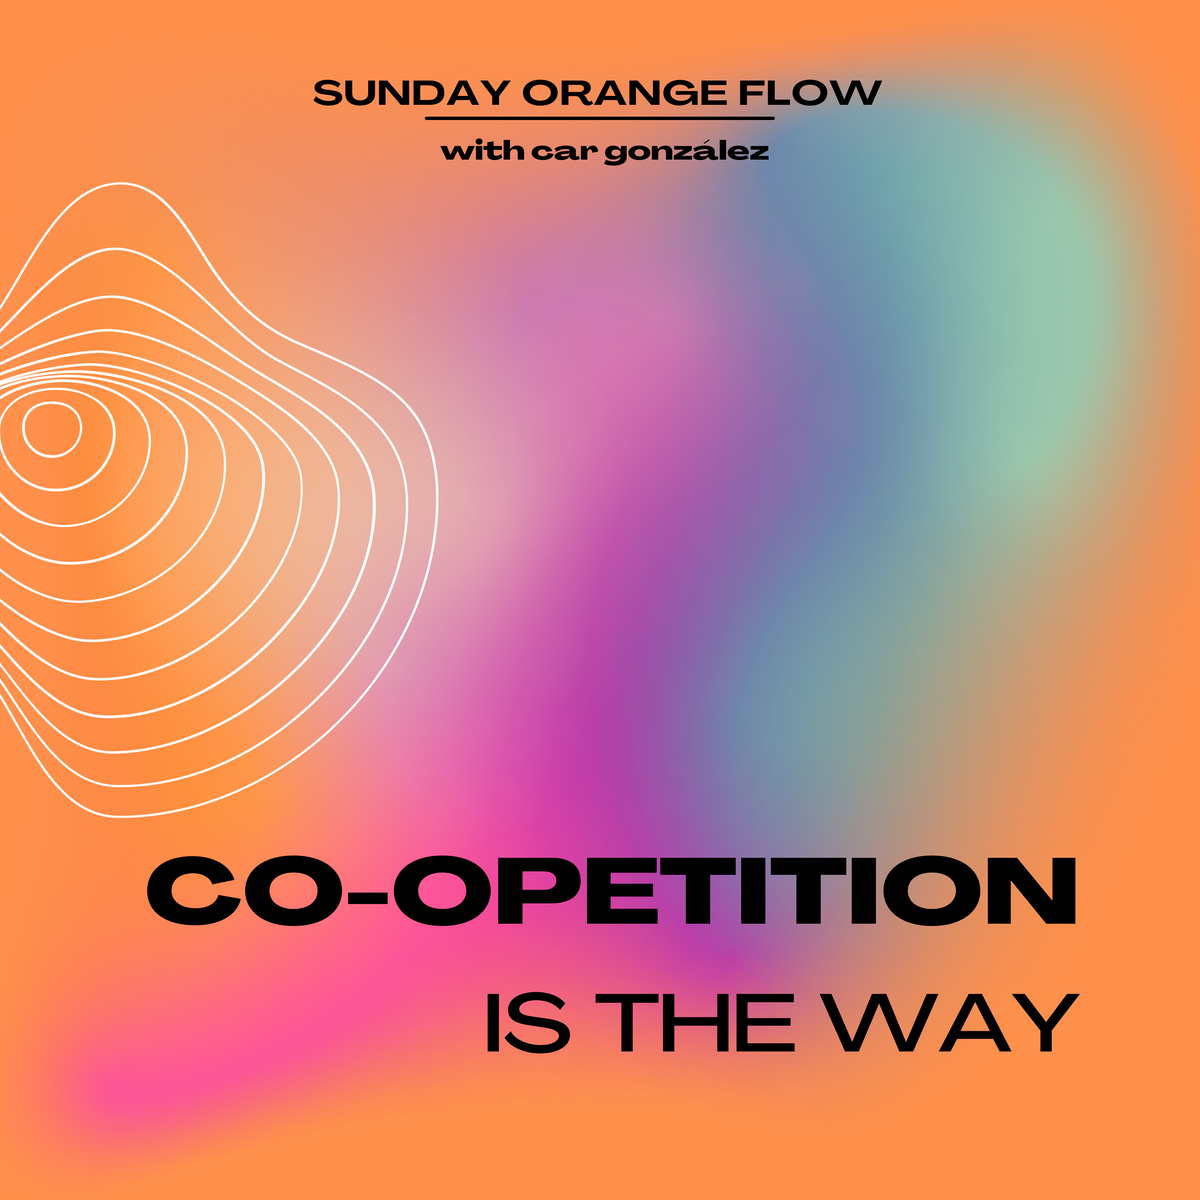 ⚒️Co-opetition is the way - Sunday Orange Flow